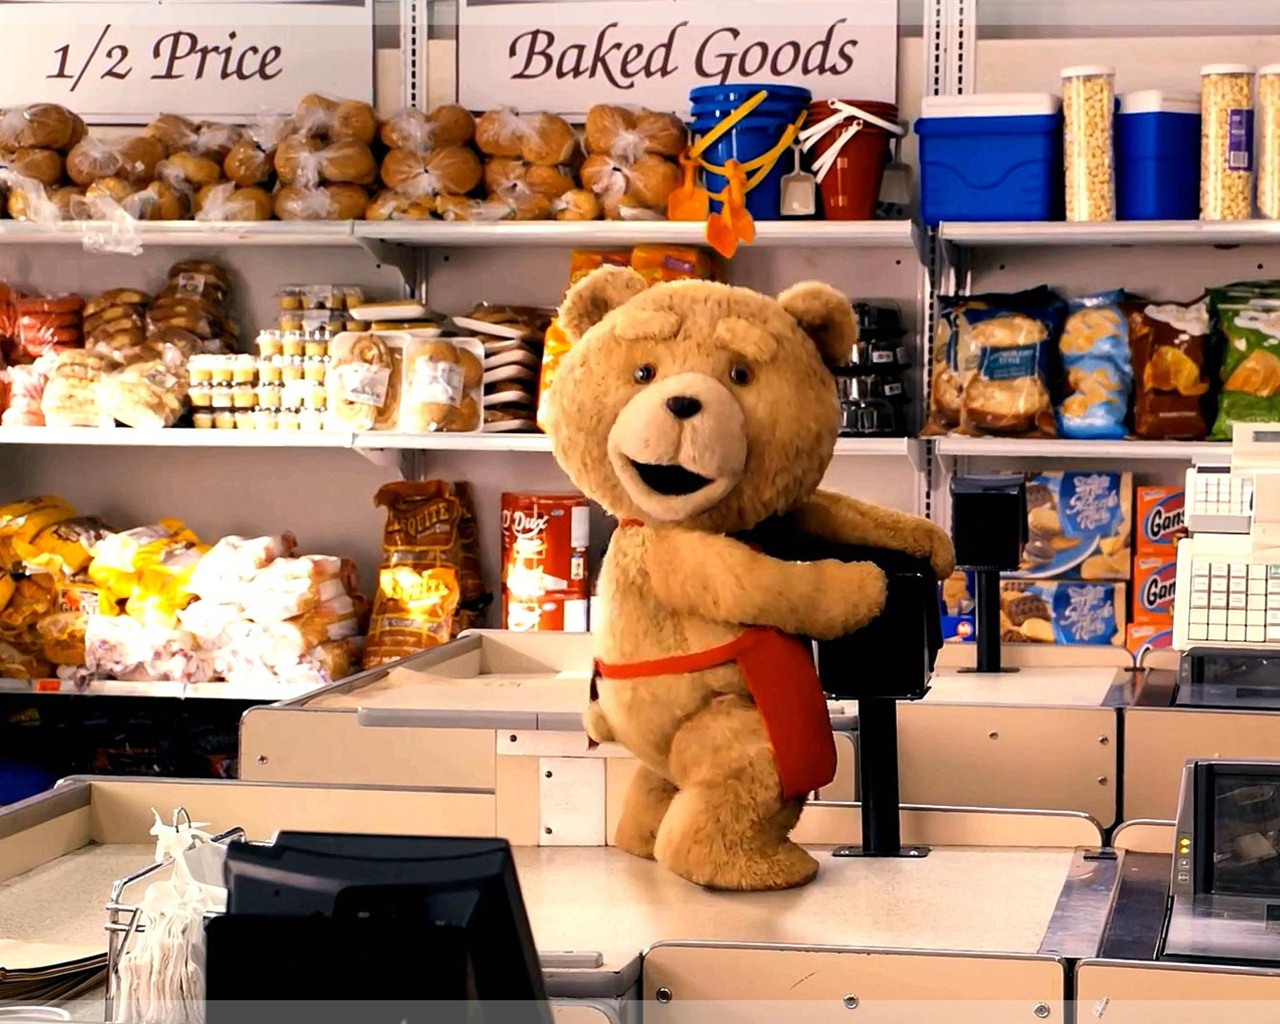 Ted 2012 HD movie wallpapers #12 - 1280x1024